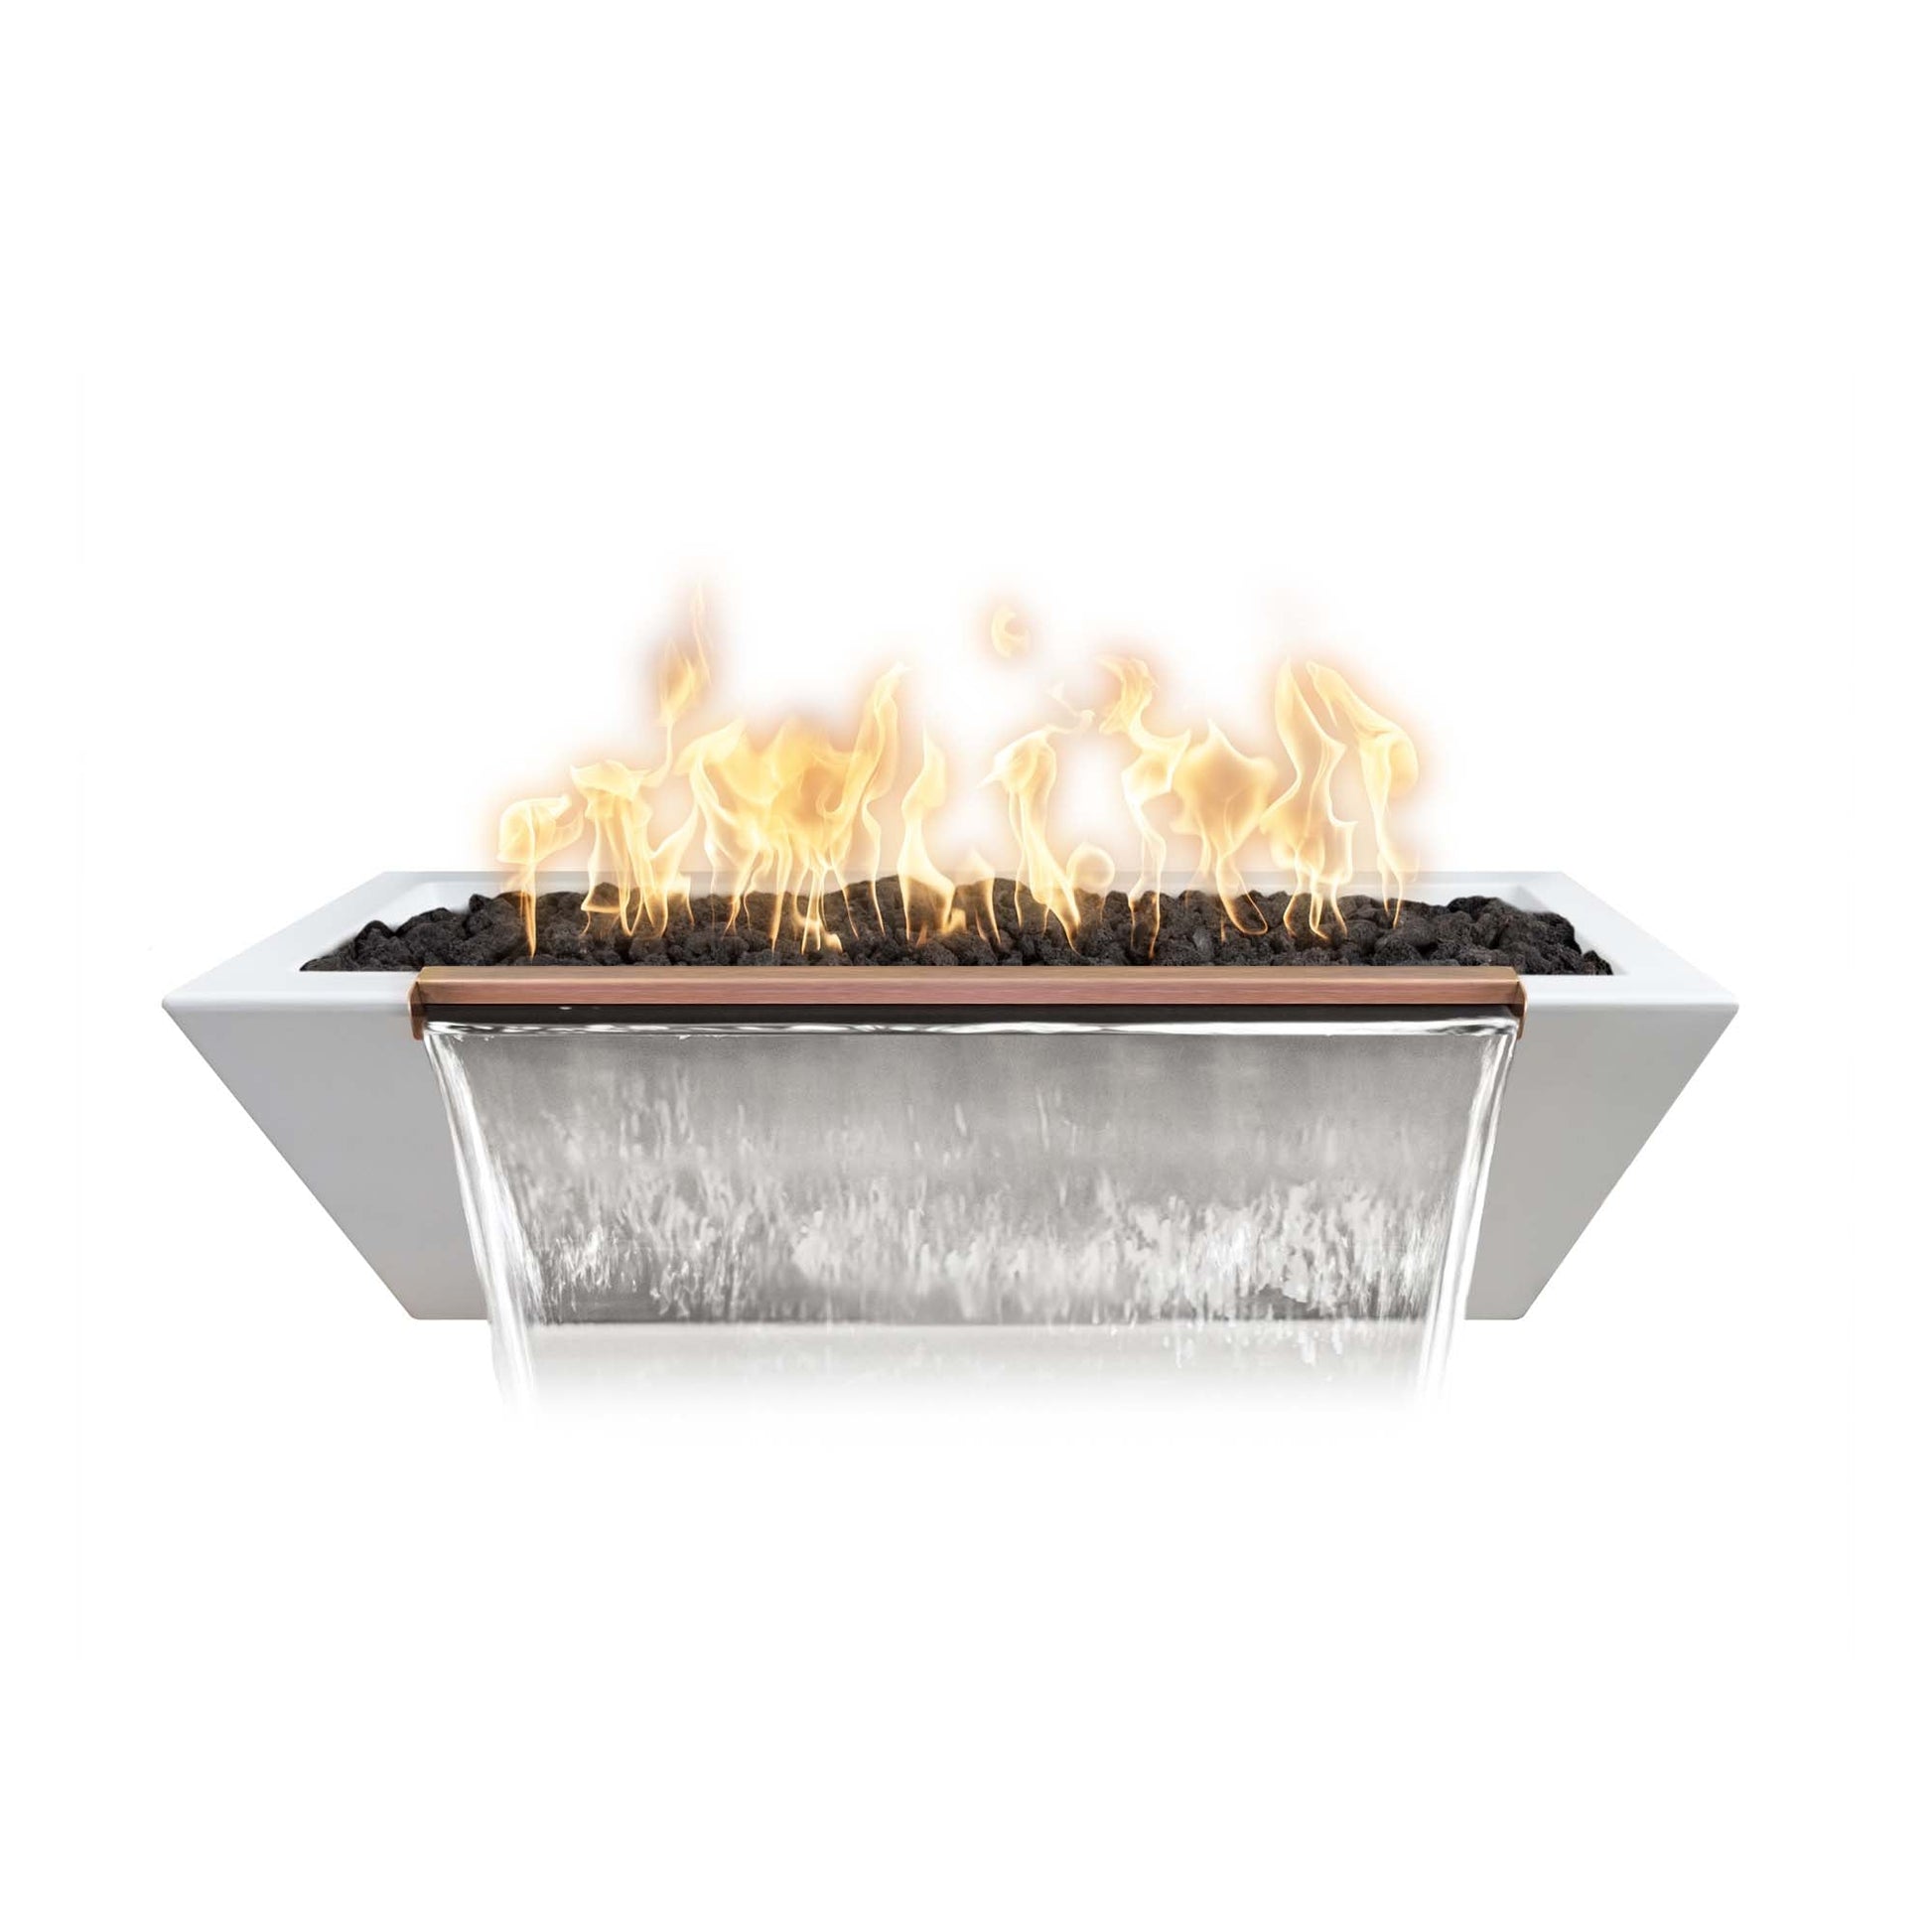 The Outdoor Plus Linear Maya 72" Black GFRC Concrete Natural Gas Fire & Water Bowl with Match Lit Ignition